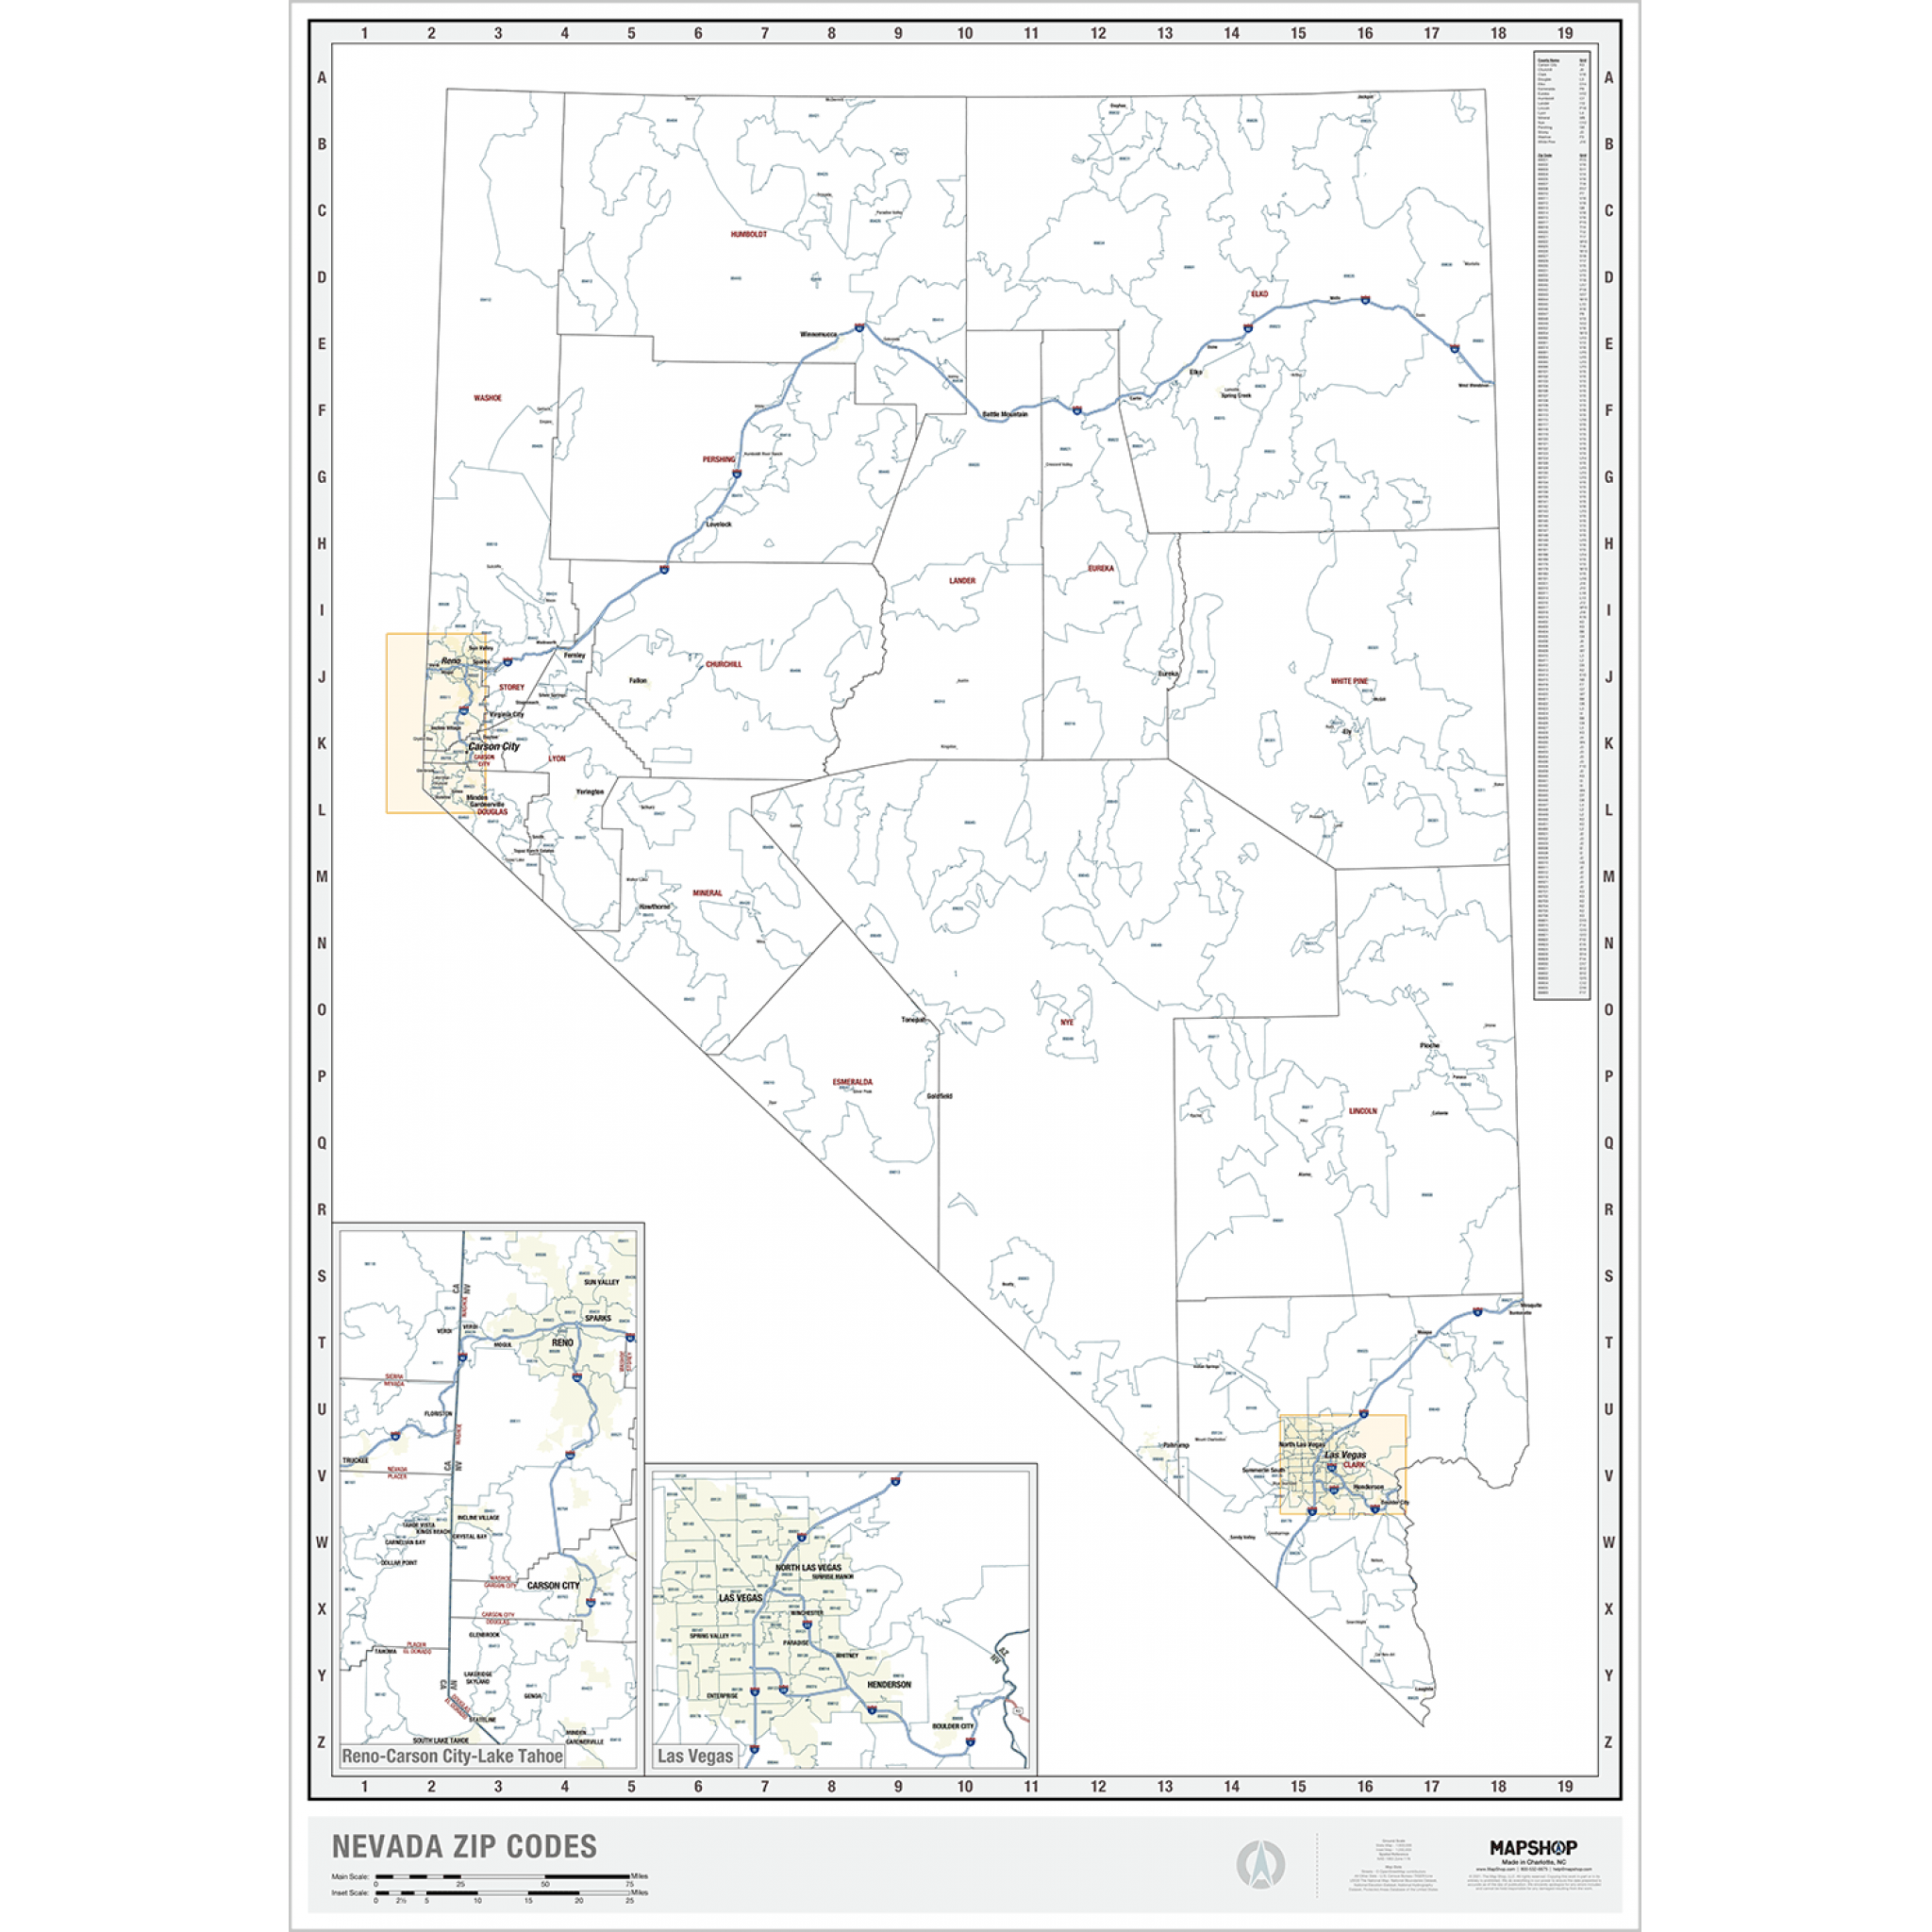 Nevada Zip Code Wall Map By Mapshop The Map Shop 8233